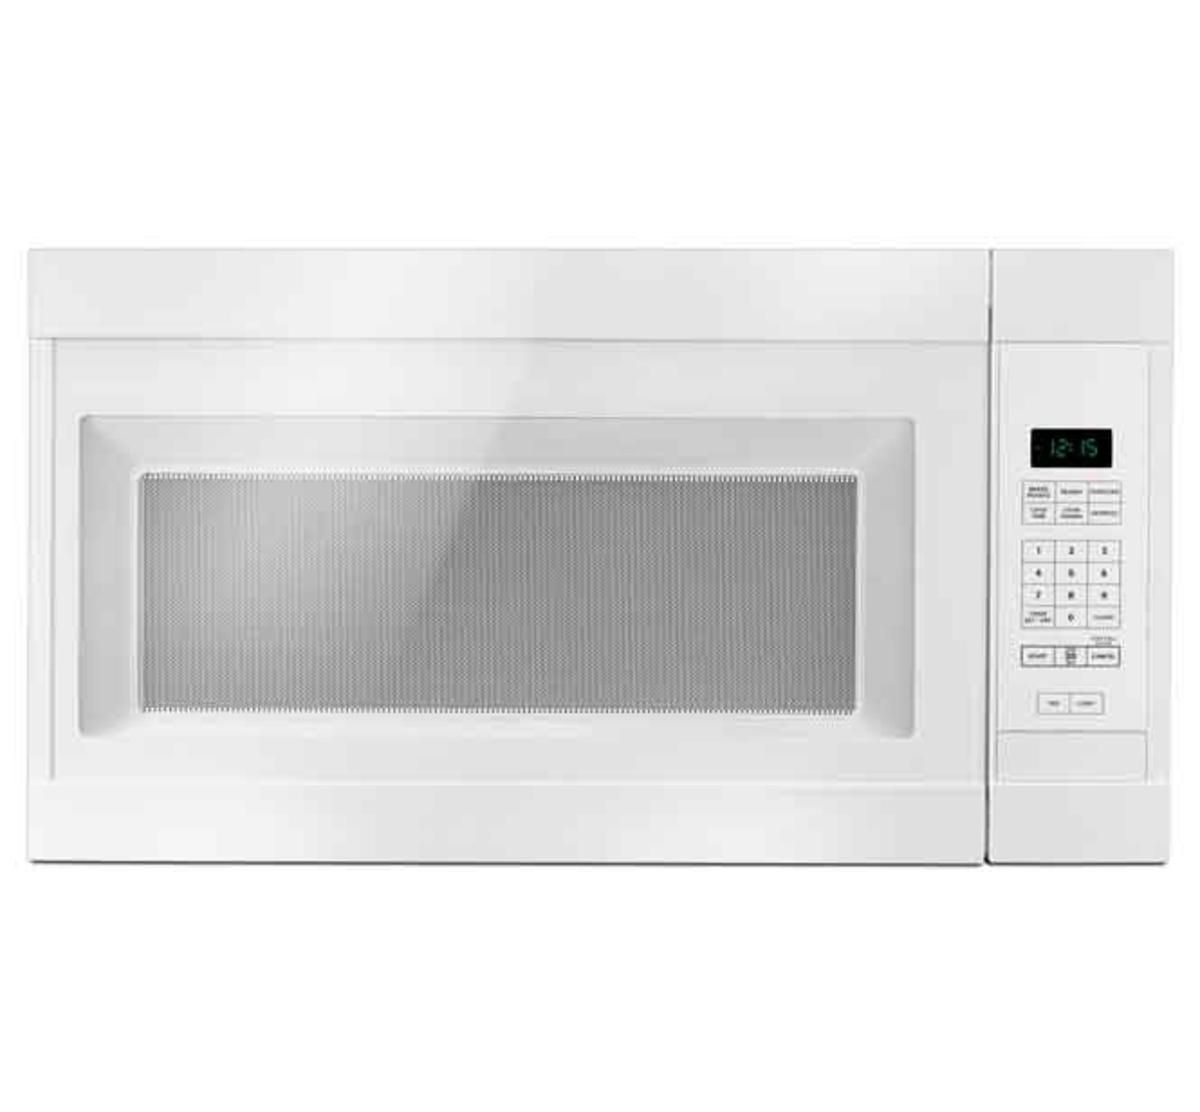 Picture of AMANA 1.6 CU. FT. OVER THE RANGE MICROWAVE